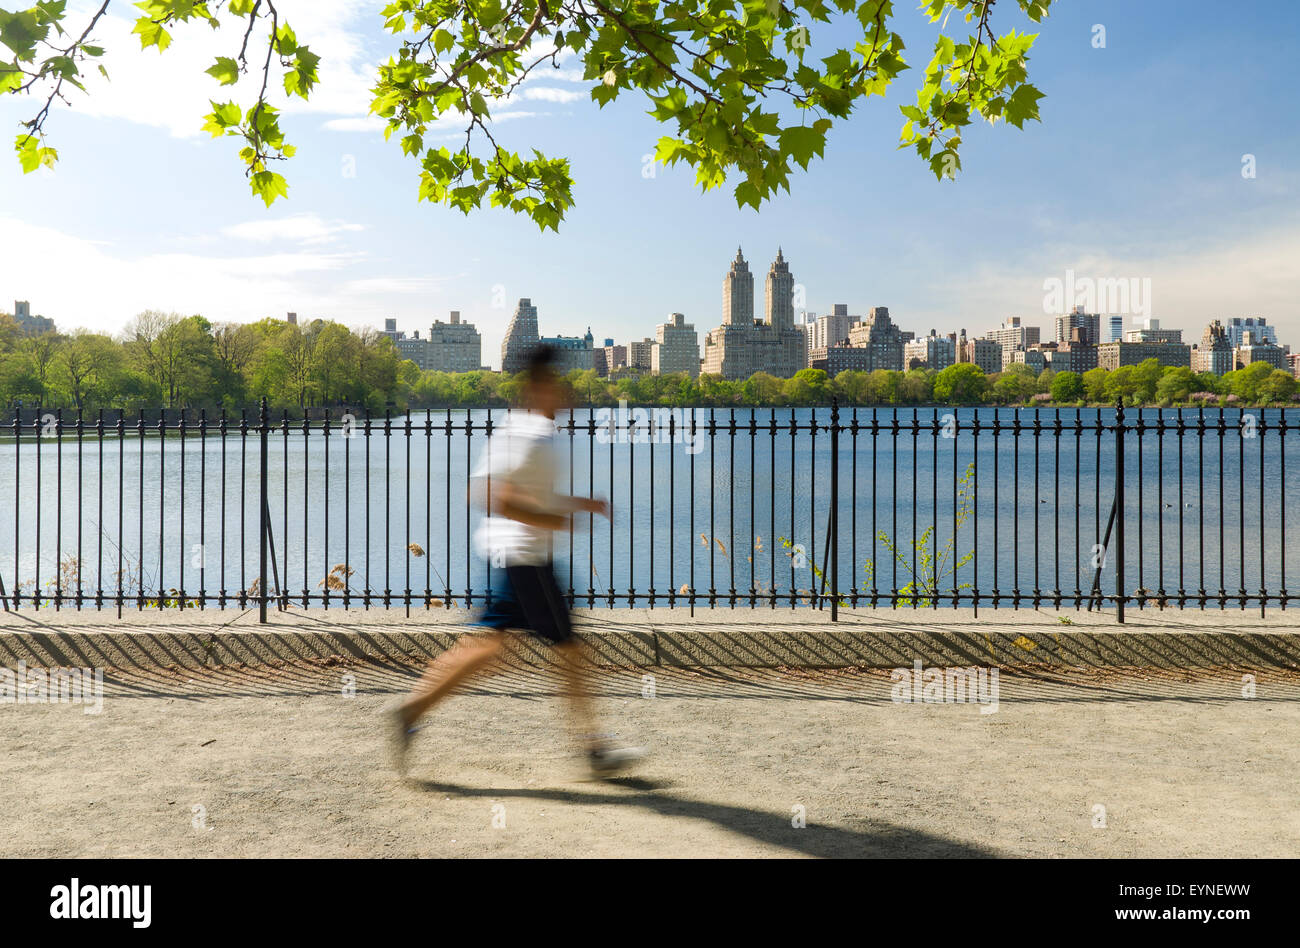 The Jacqeuline Kennedy Onassis Reservoir, Central Park, New York City in spring season. Stock Photo